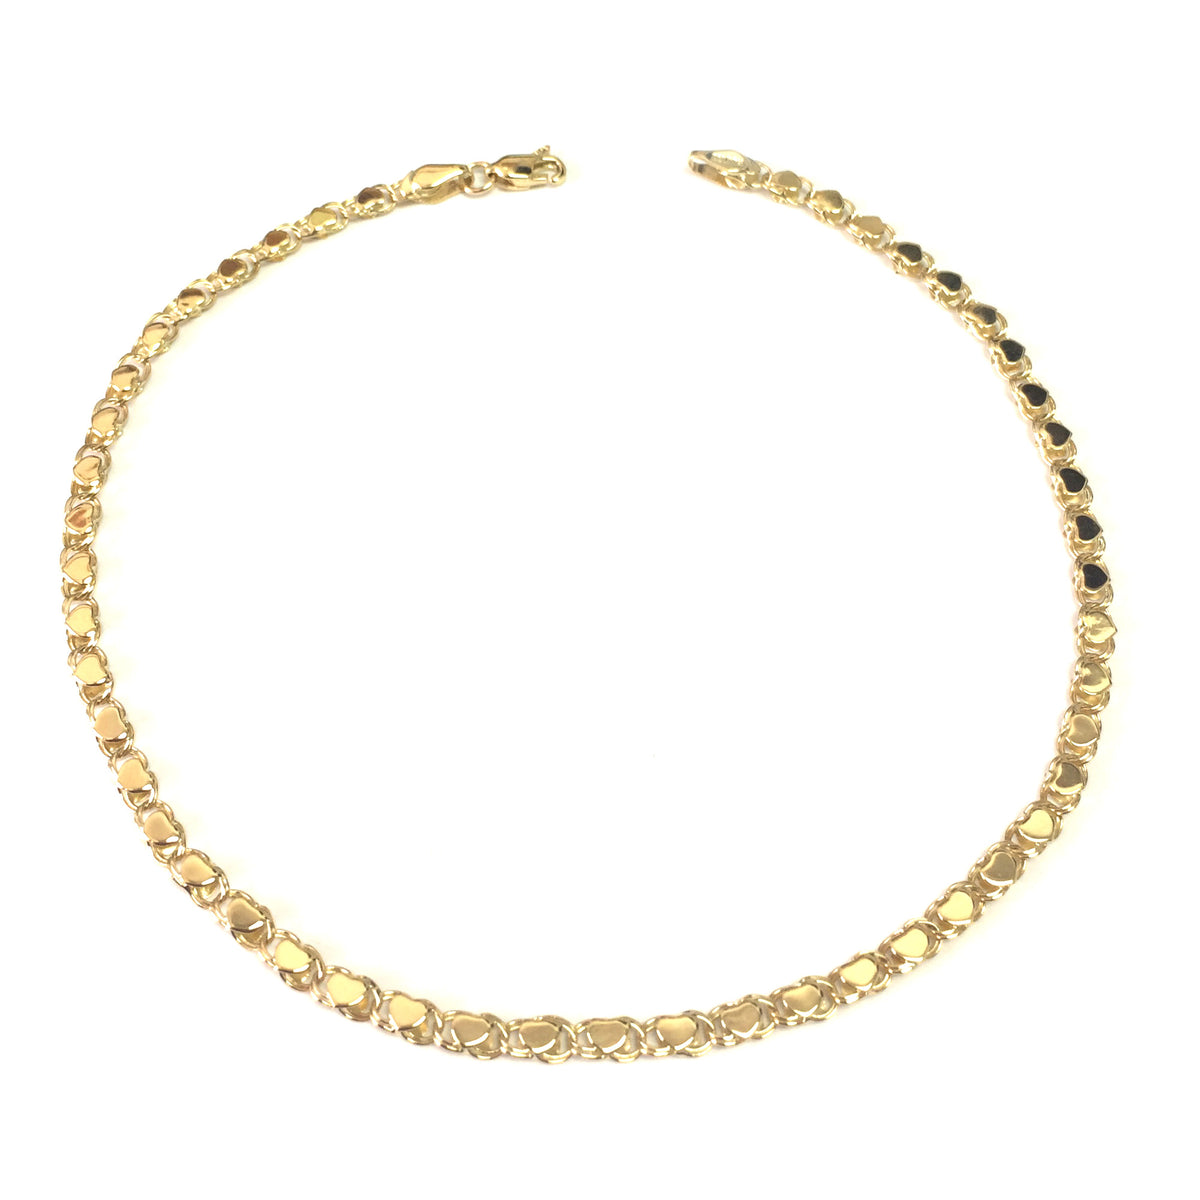 14K Yellow Gold Diamond Cut Hearts Chain Anklet, 10" fine designer jewelry for men and women